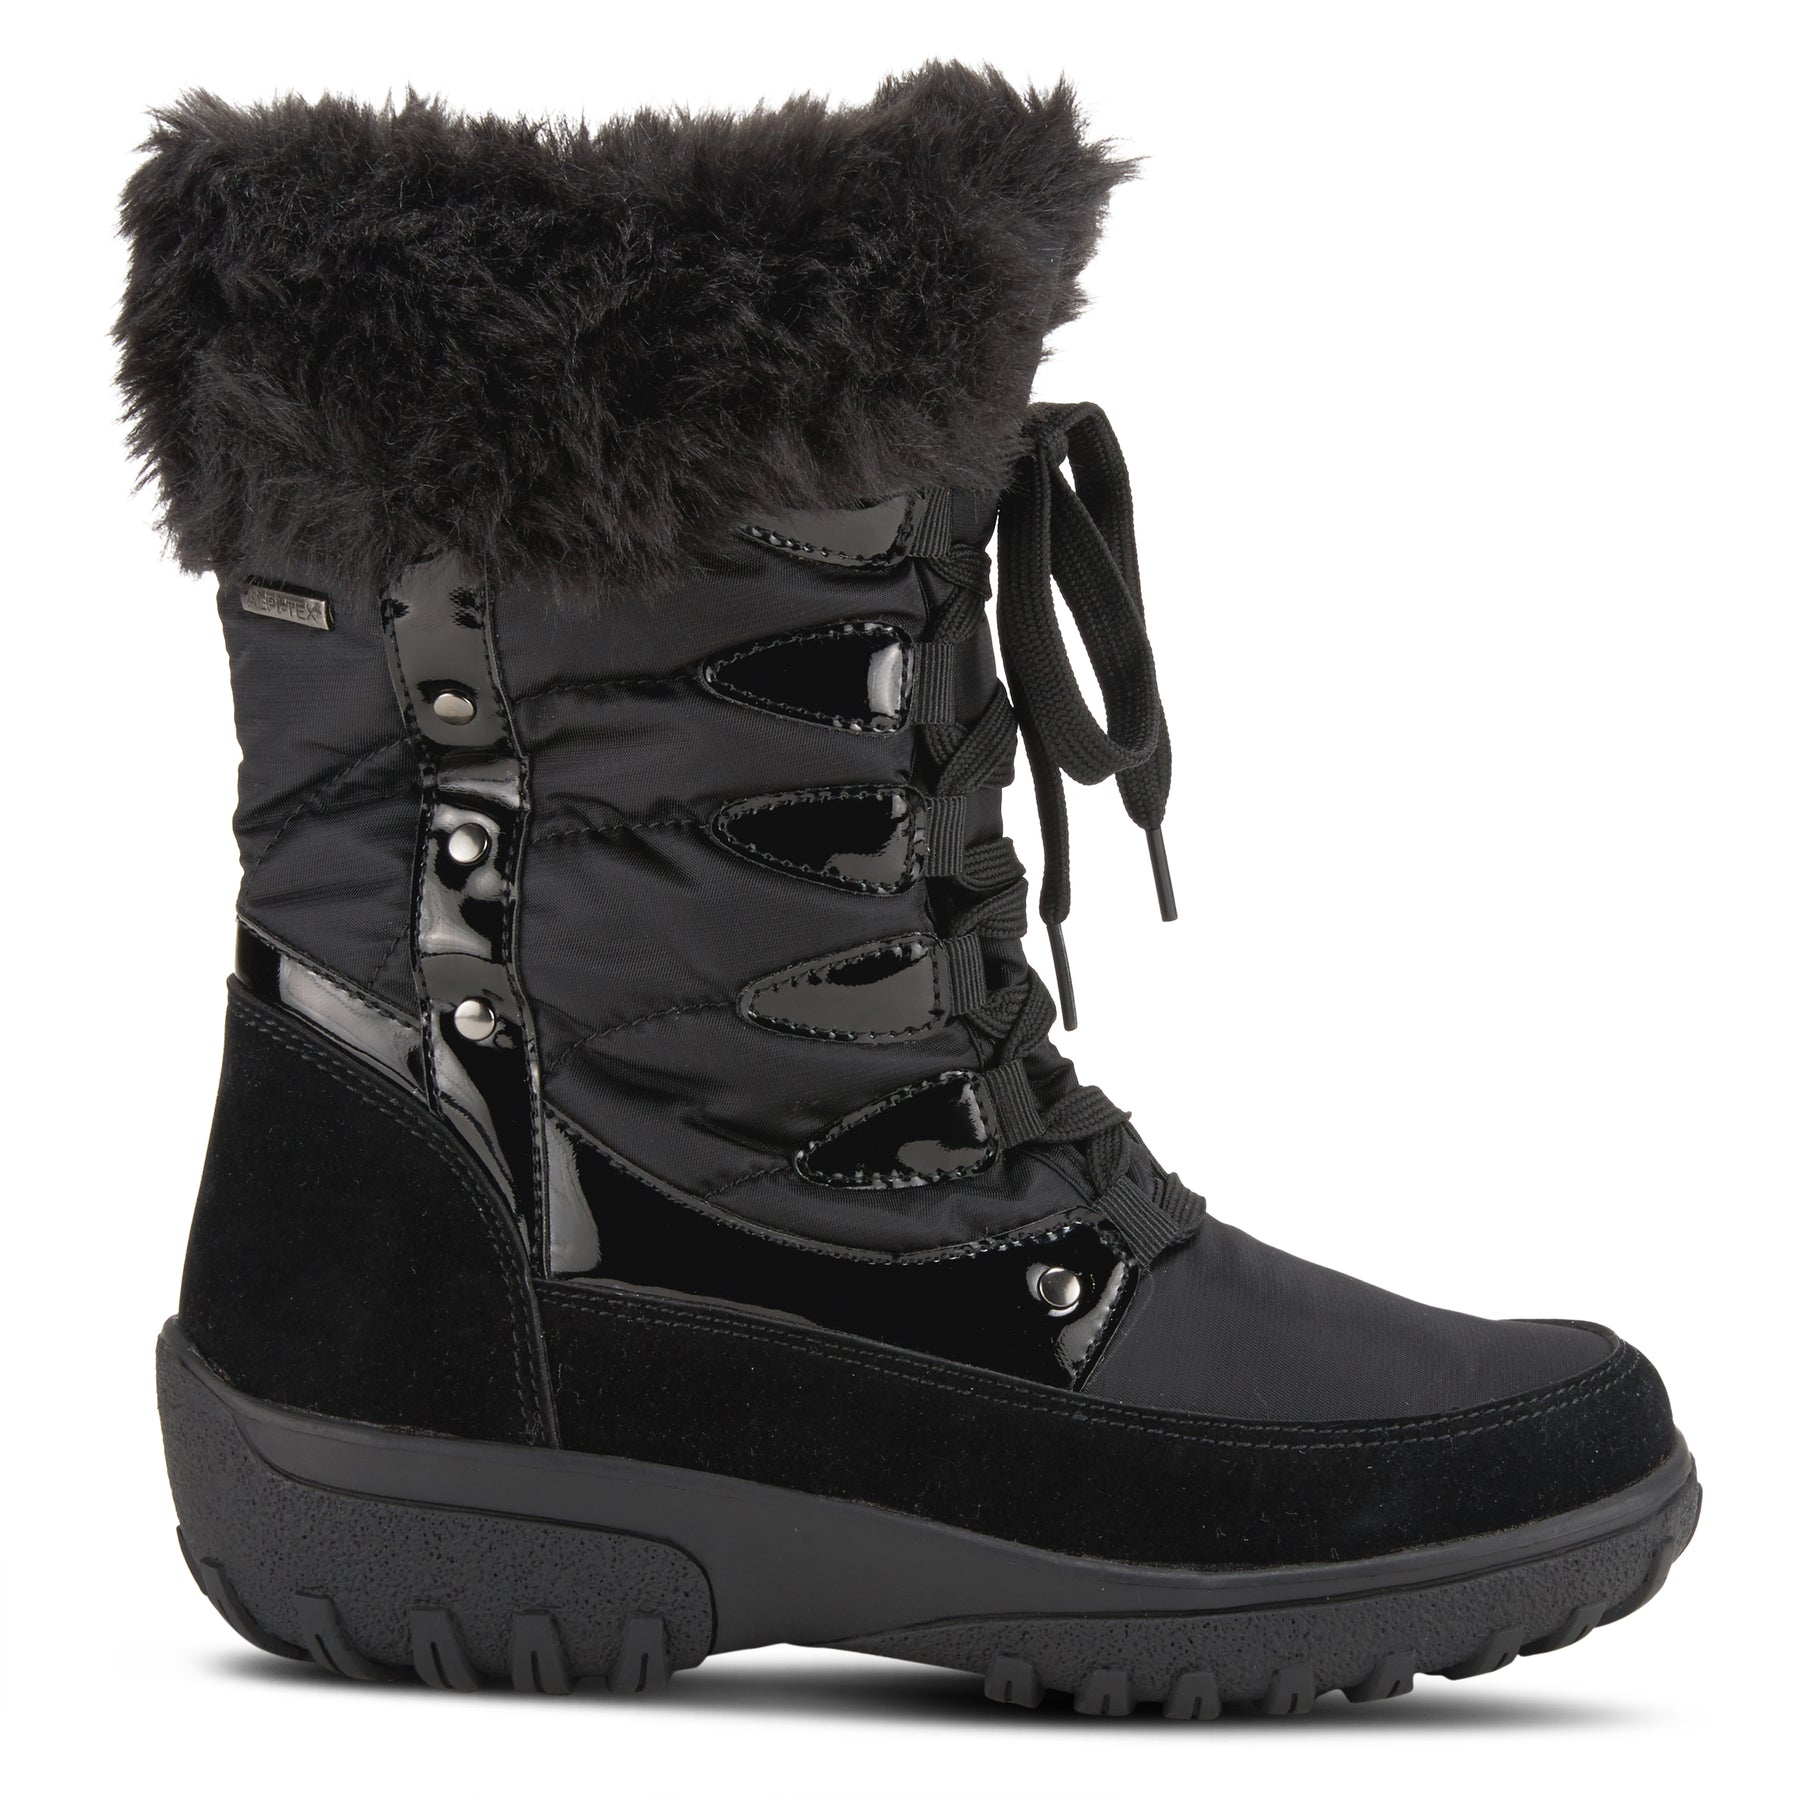 Flexus Stormy Boots: Vegan Friendly Boots – Spring Step Shoes